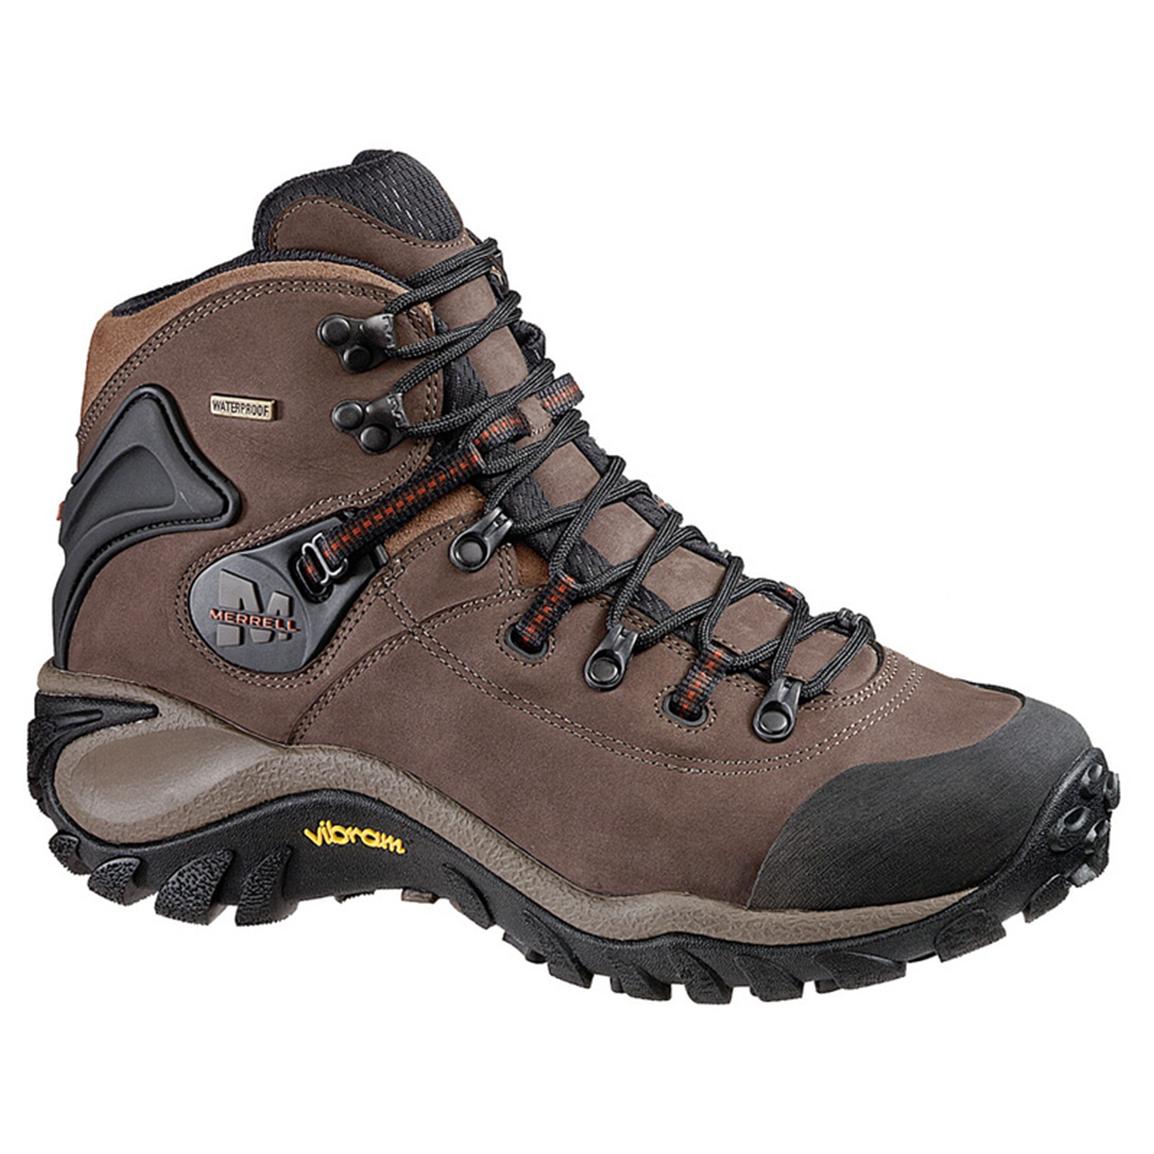 Albums 103+ Pictures Images Of Hiking Boots Latest